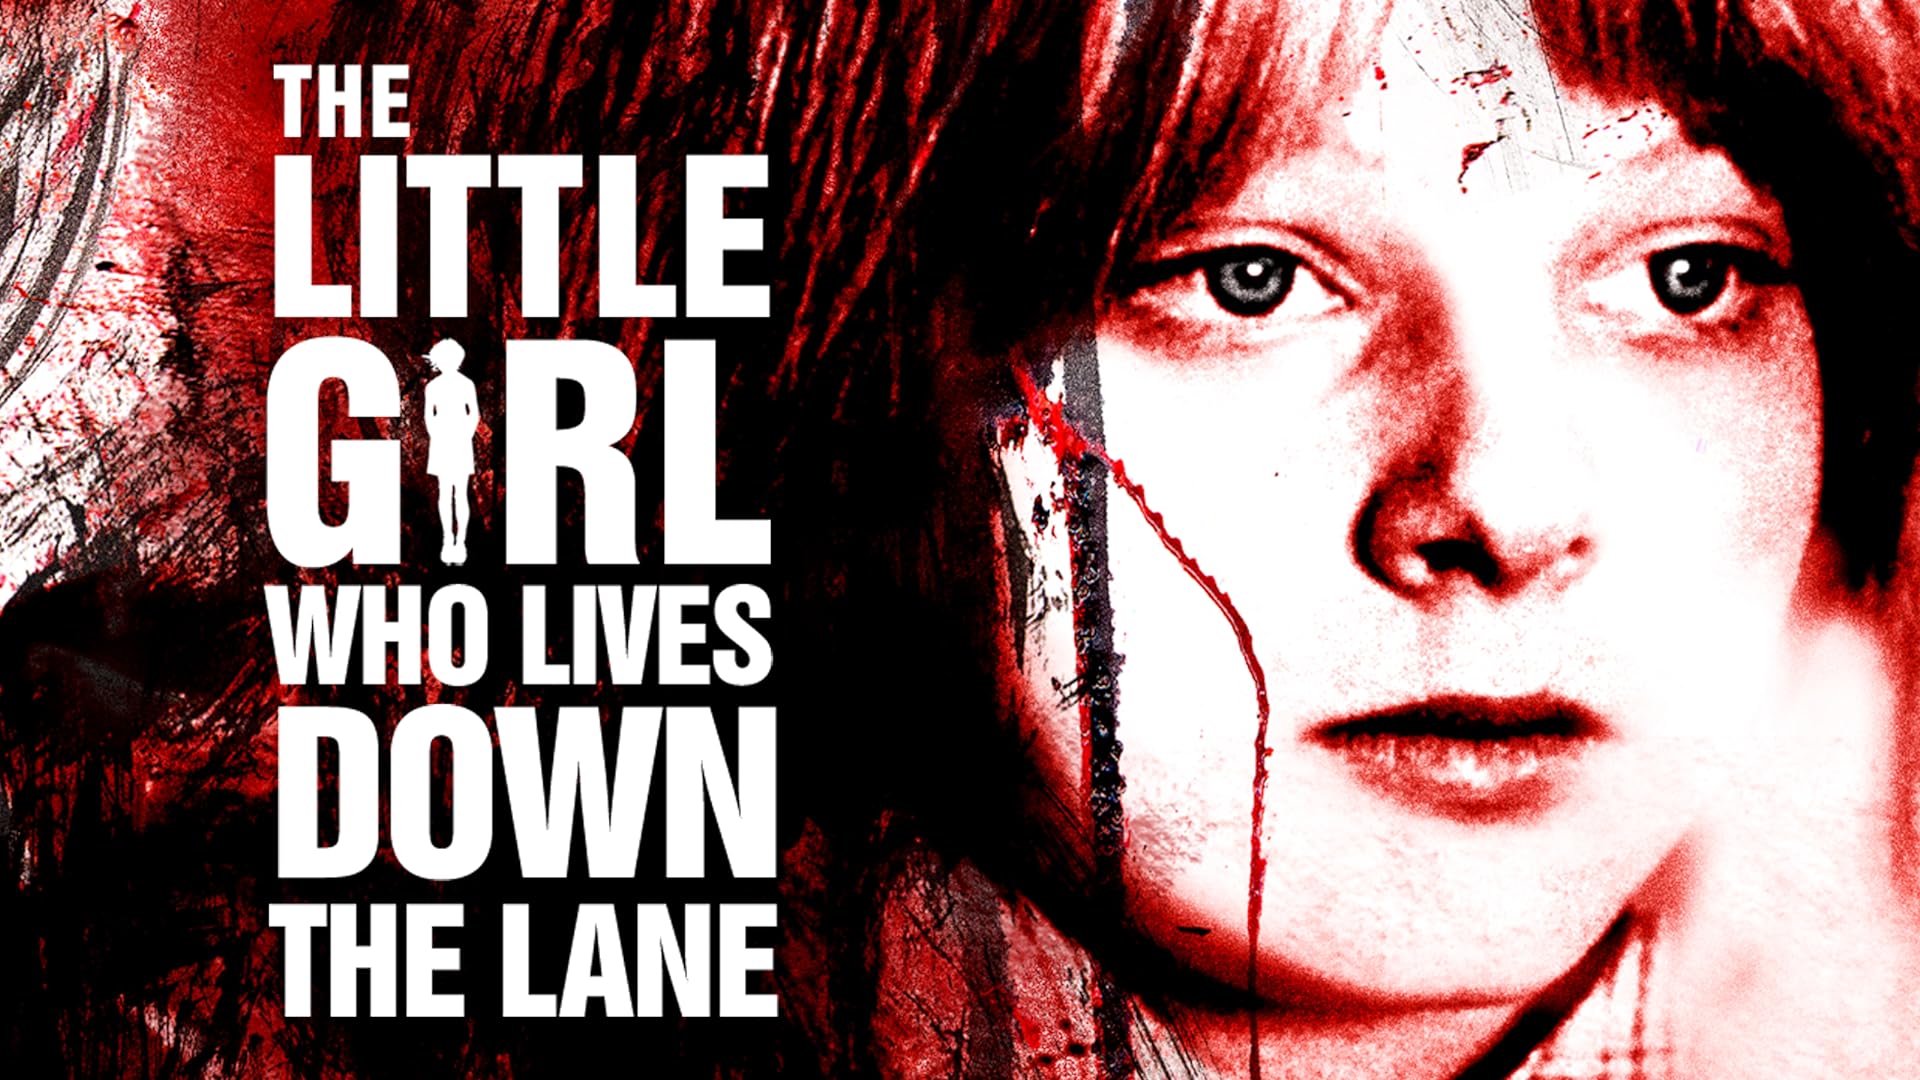 42-facts-about-the-movie-the-little-girl-who-lives-down-the-lane